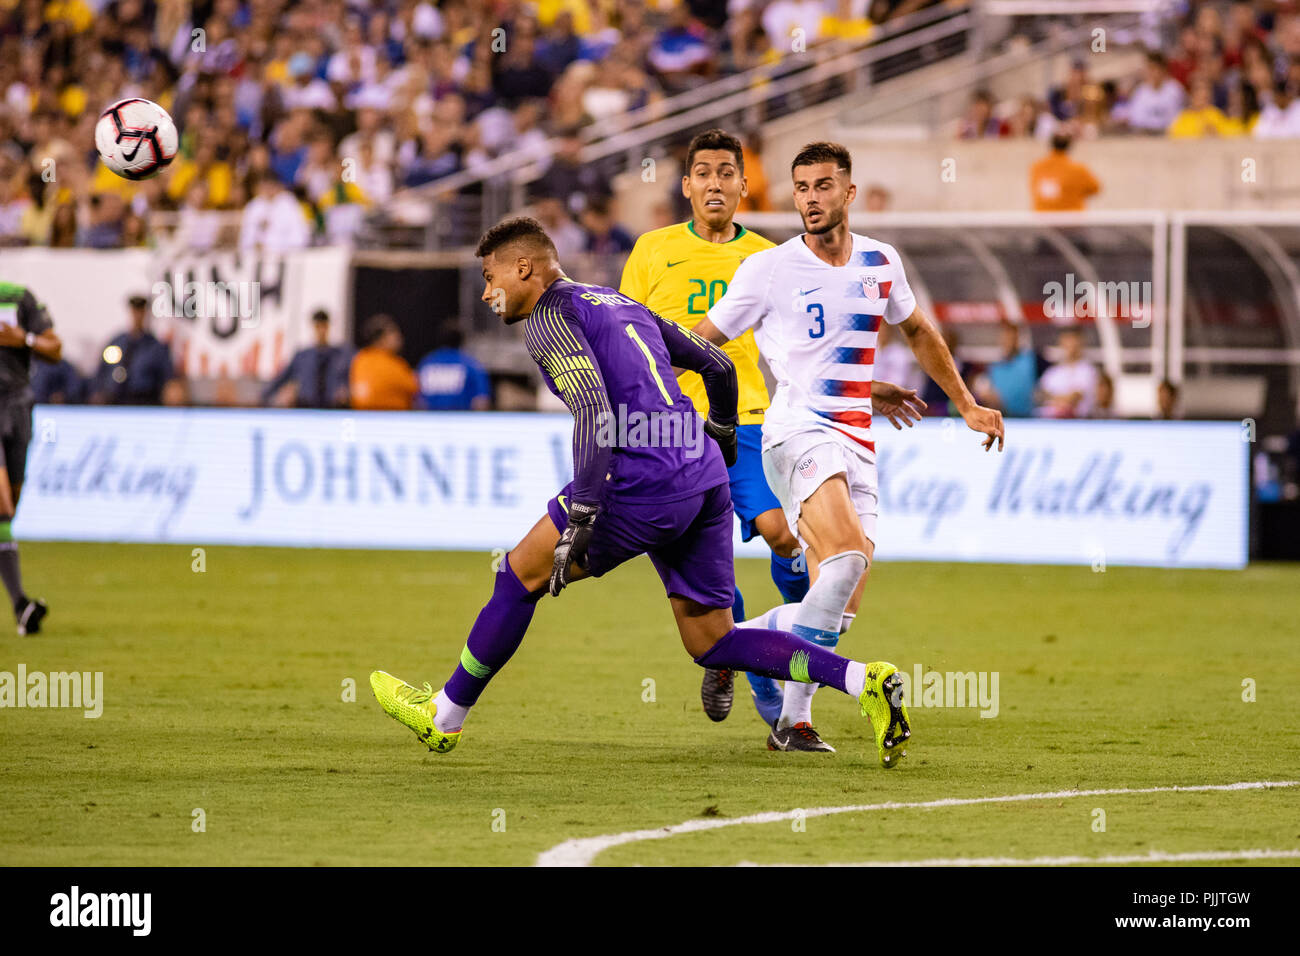 East Rutherford, NJ, USA. 7th Sept, 2018. Zack Steffen (1) comes flying out of his box to clear a ball in the second half of USA international friendly against Brazil. © Ben Nichols/Alamy Live News Stock Photo